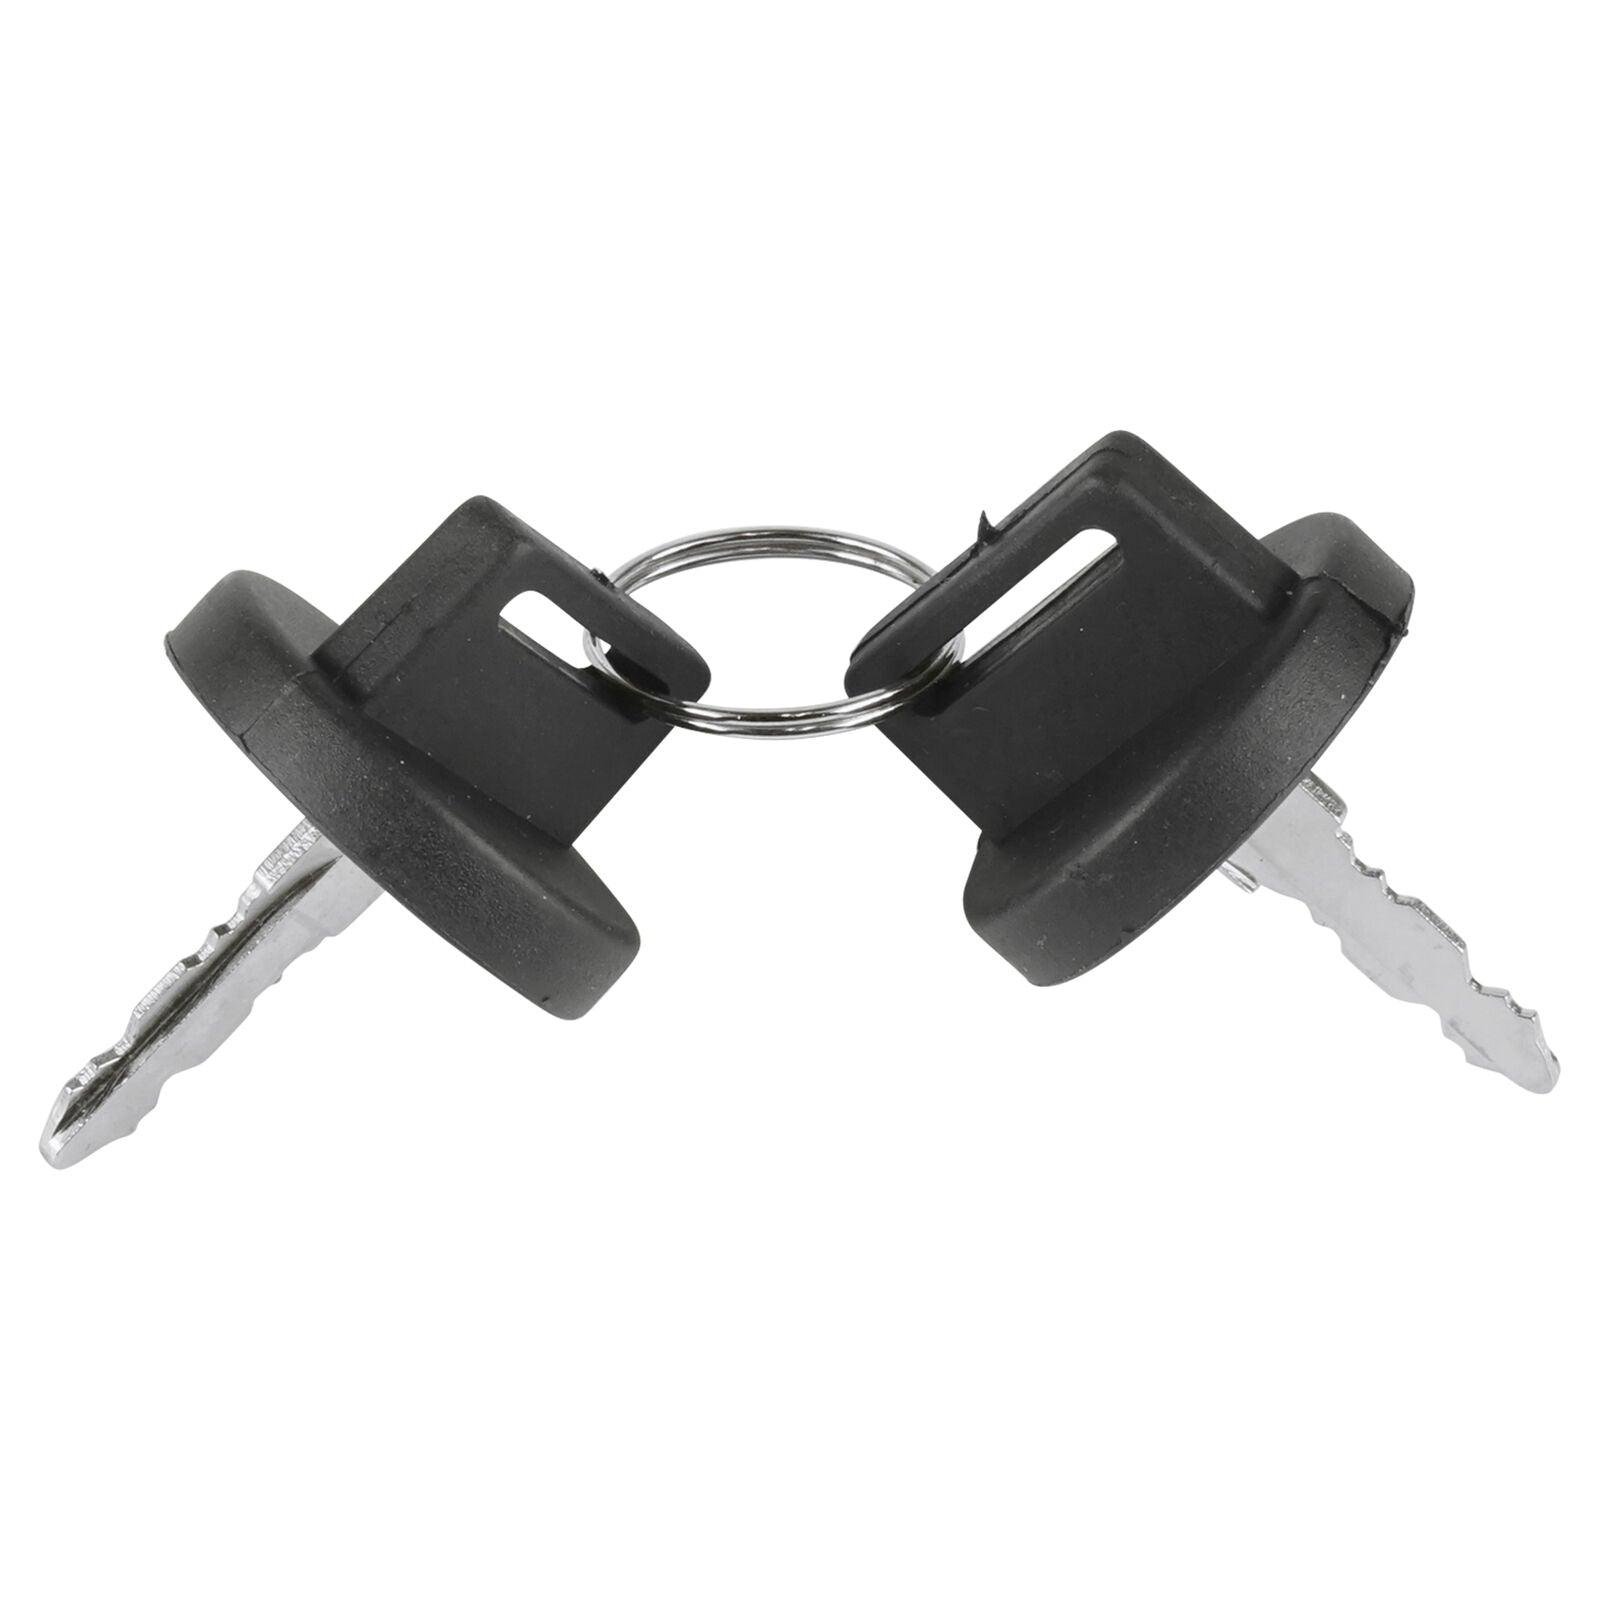 Kinglyday Ignition Key Switch - Replacement Part for Honda TRX125 Fourtrax 125 (1985-1986) - KinglyDay